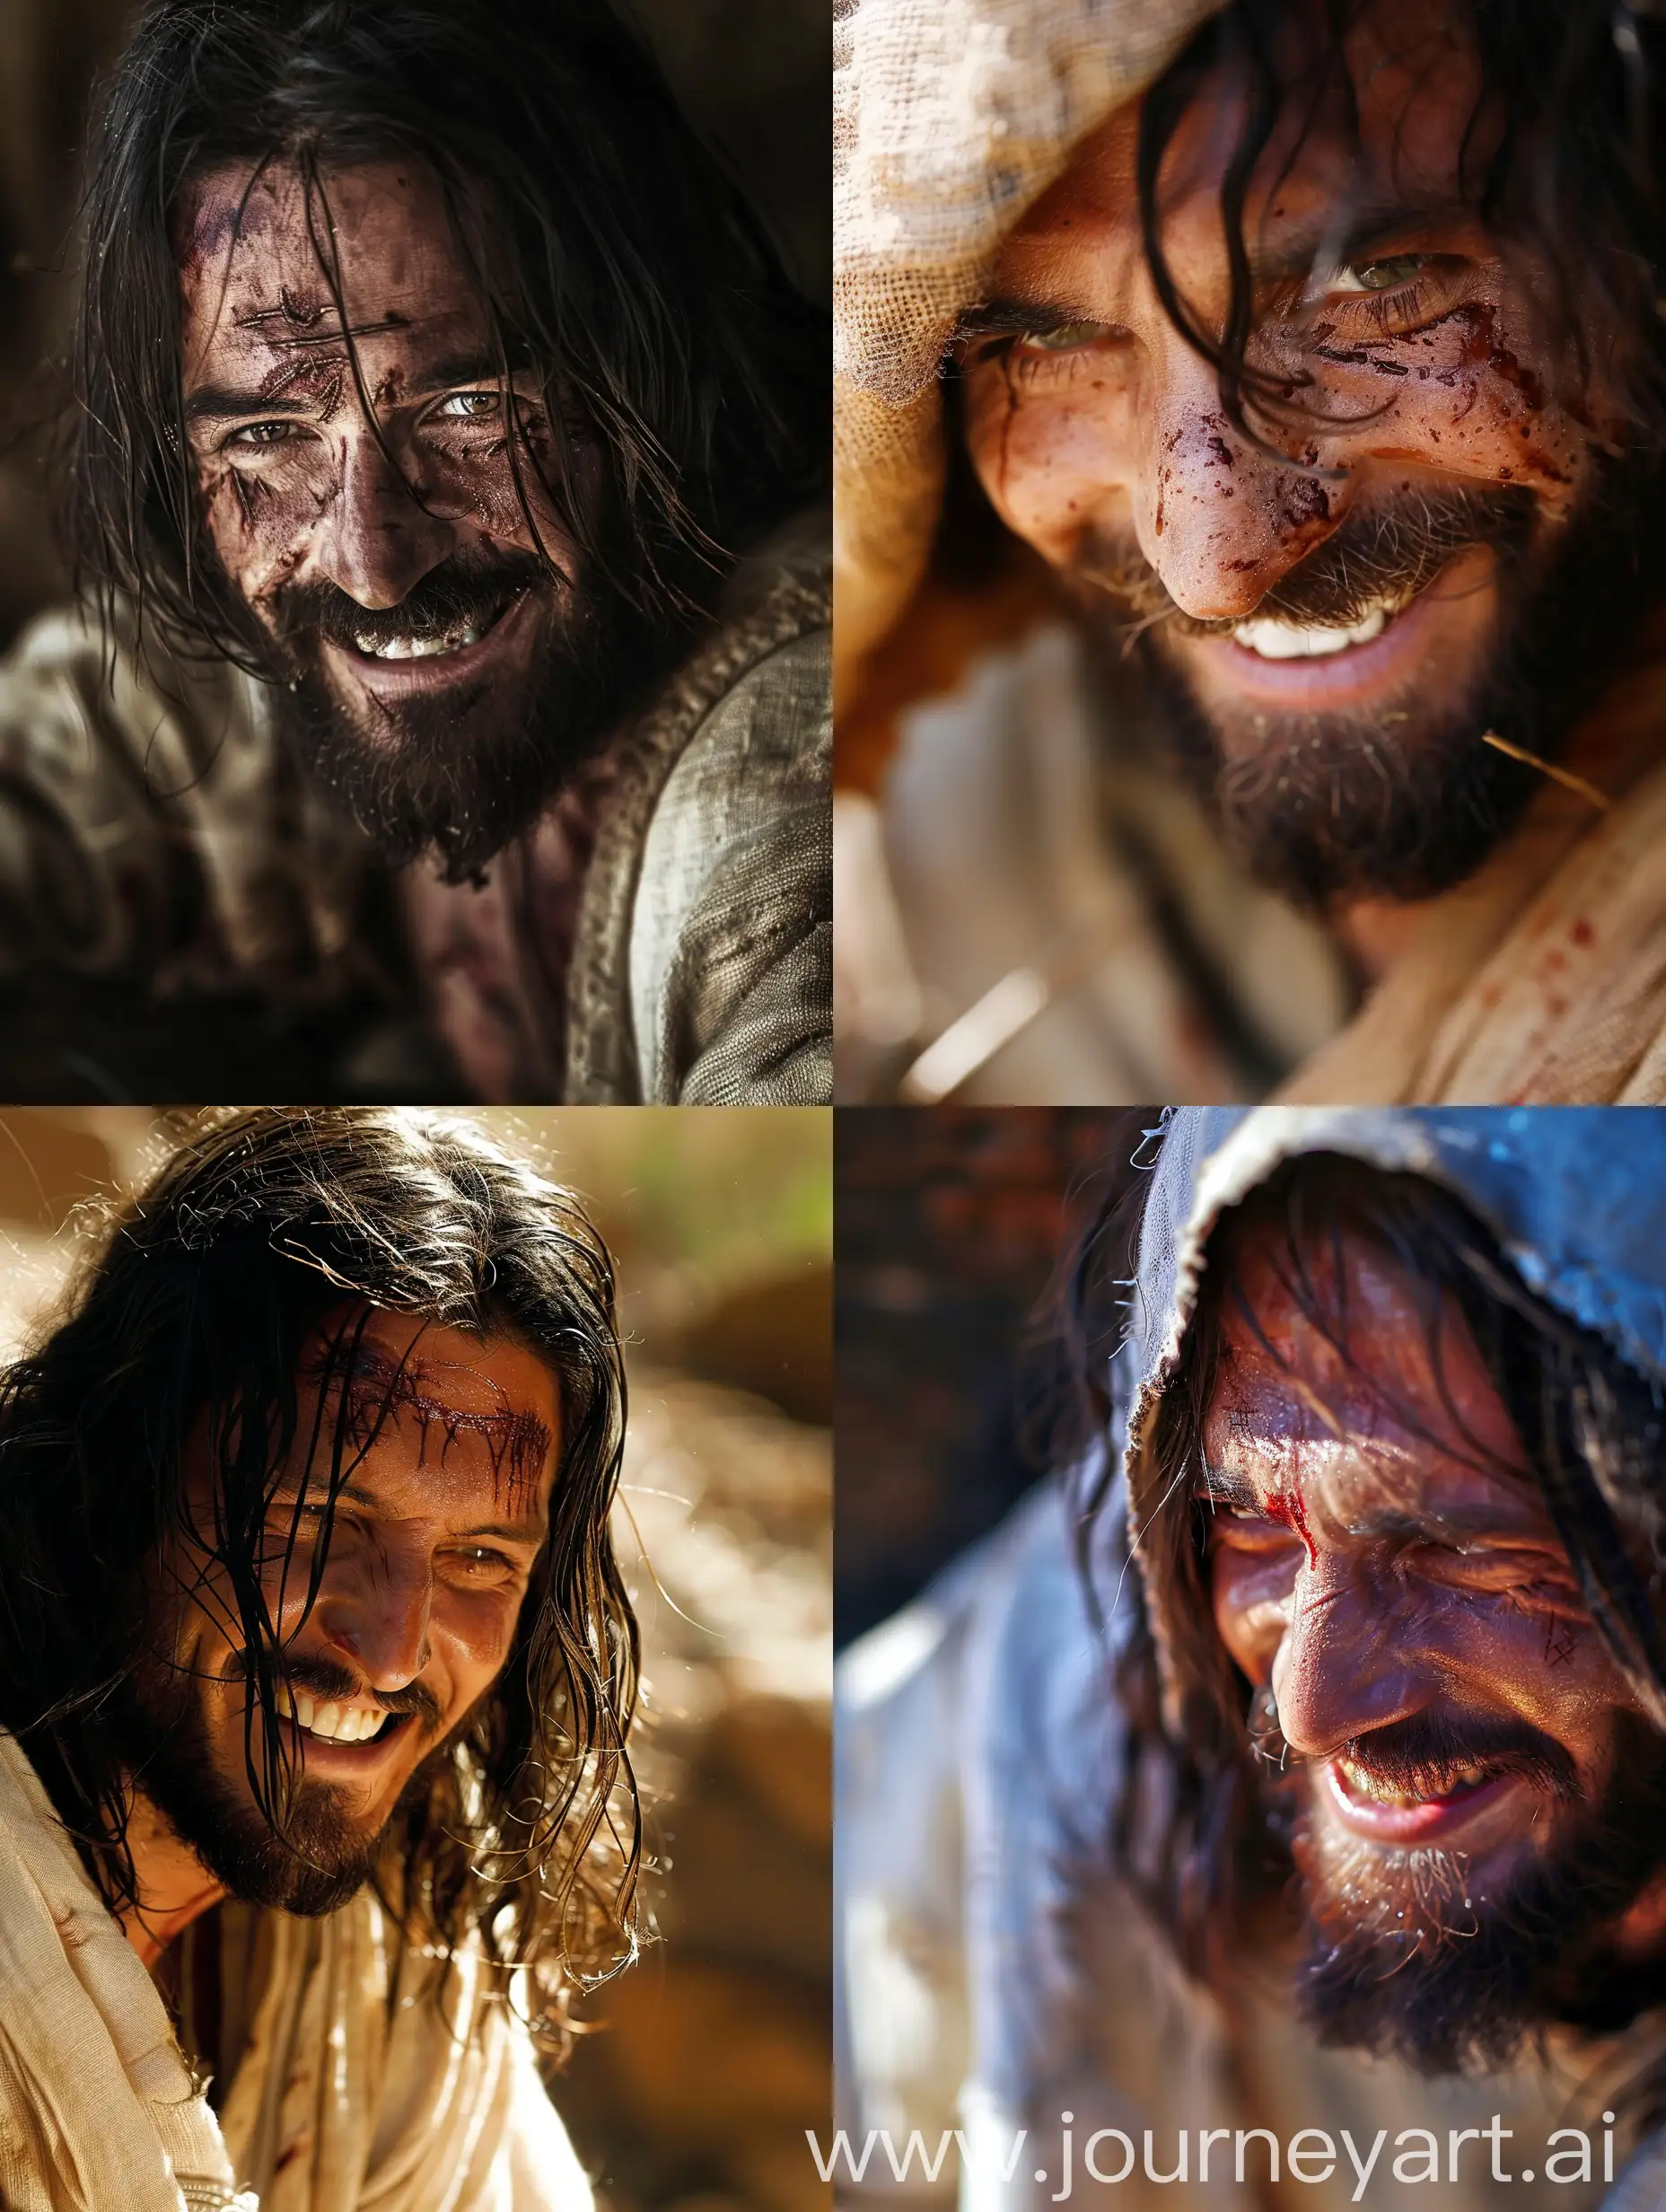 Jesus smiles with a wounded face